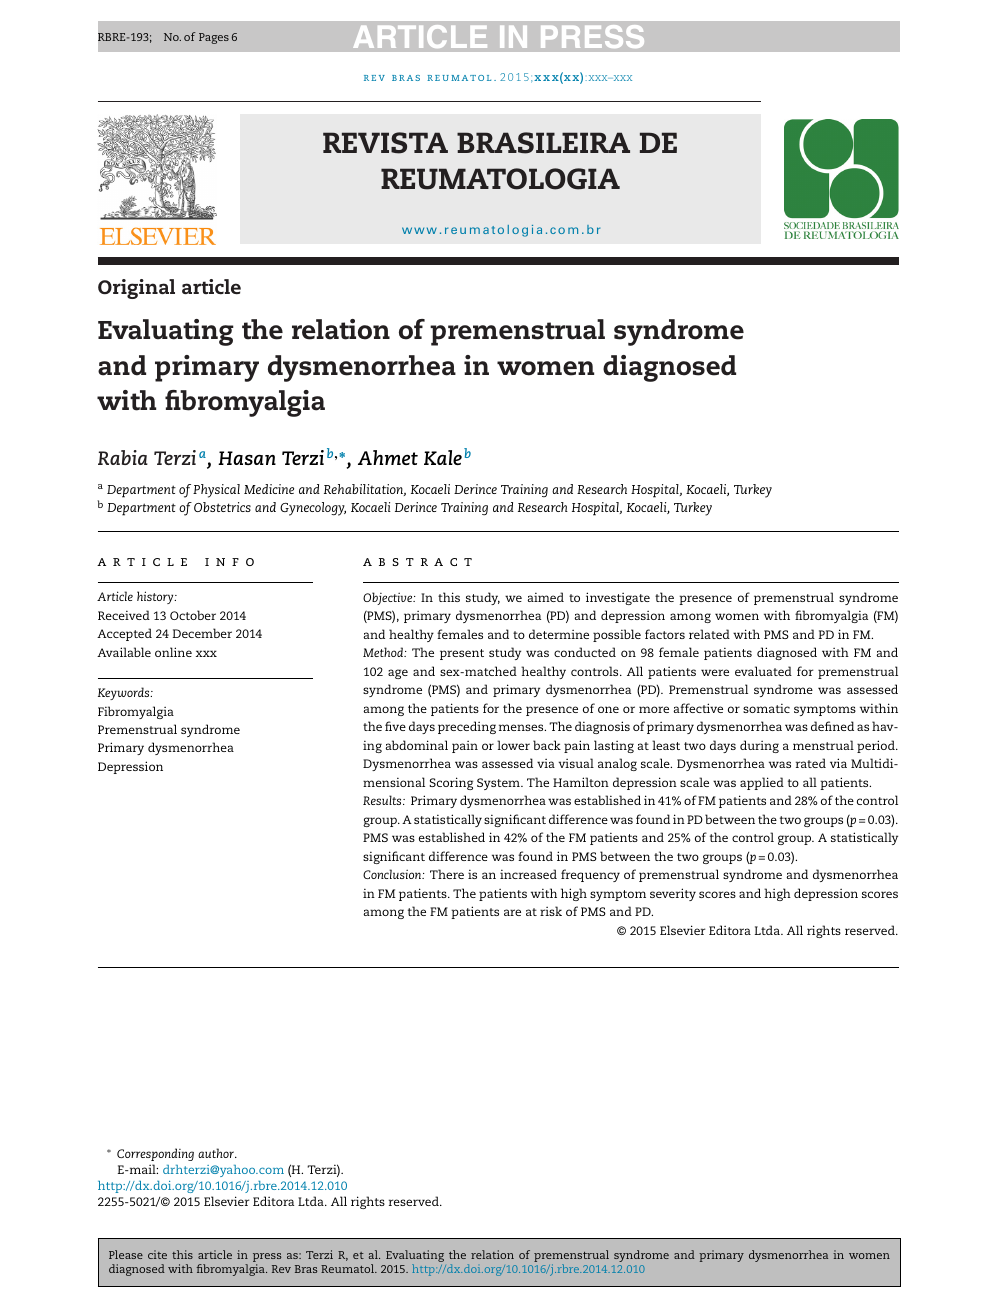 Evaluating the relation of premenstrual syndrome and primary dysmenorrhea in women diagnosed with fibromyalgia picture